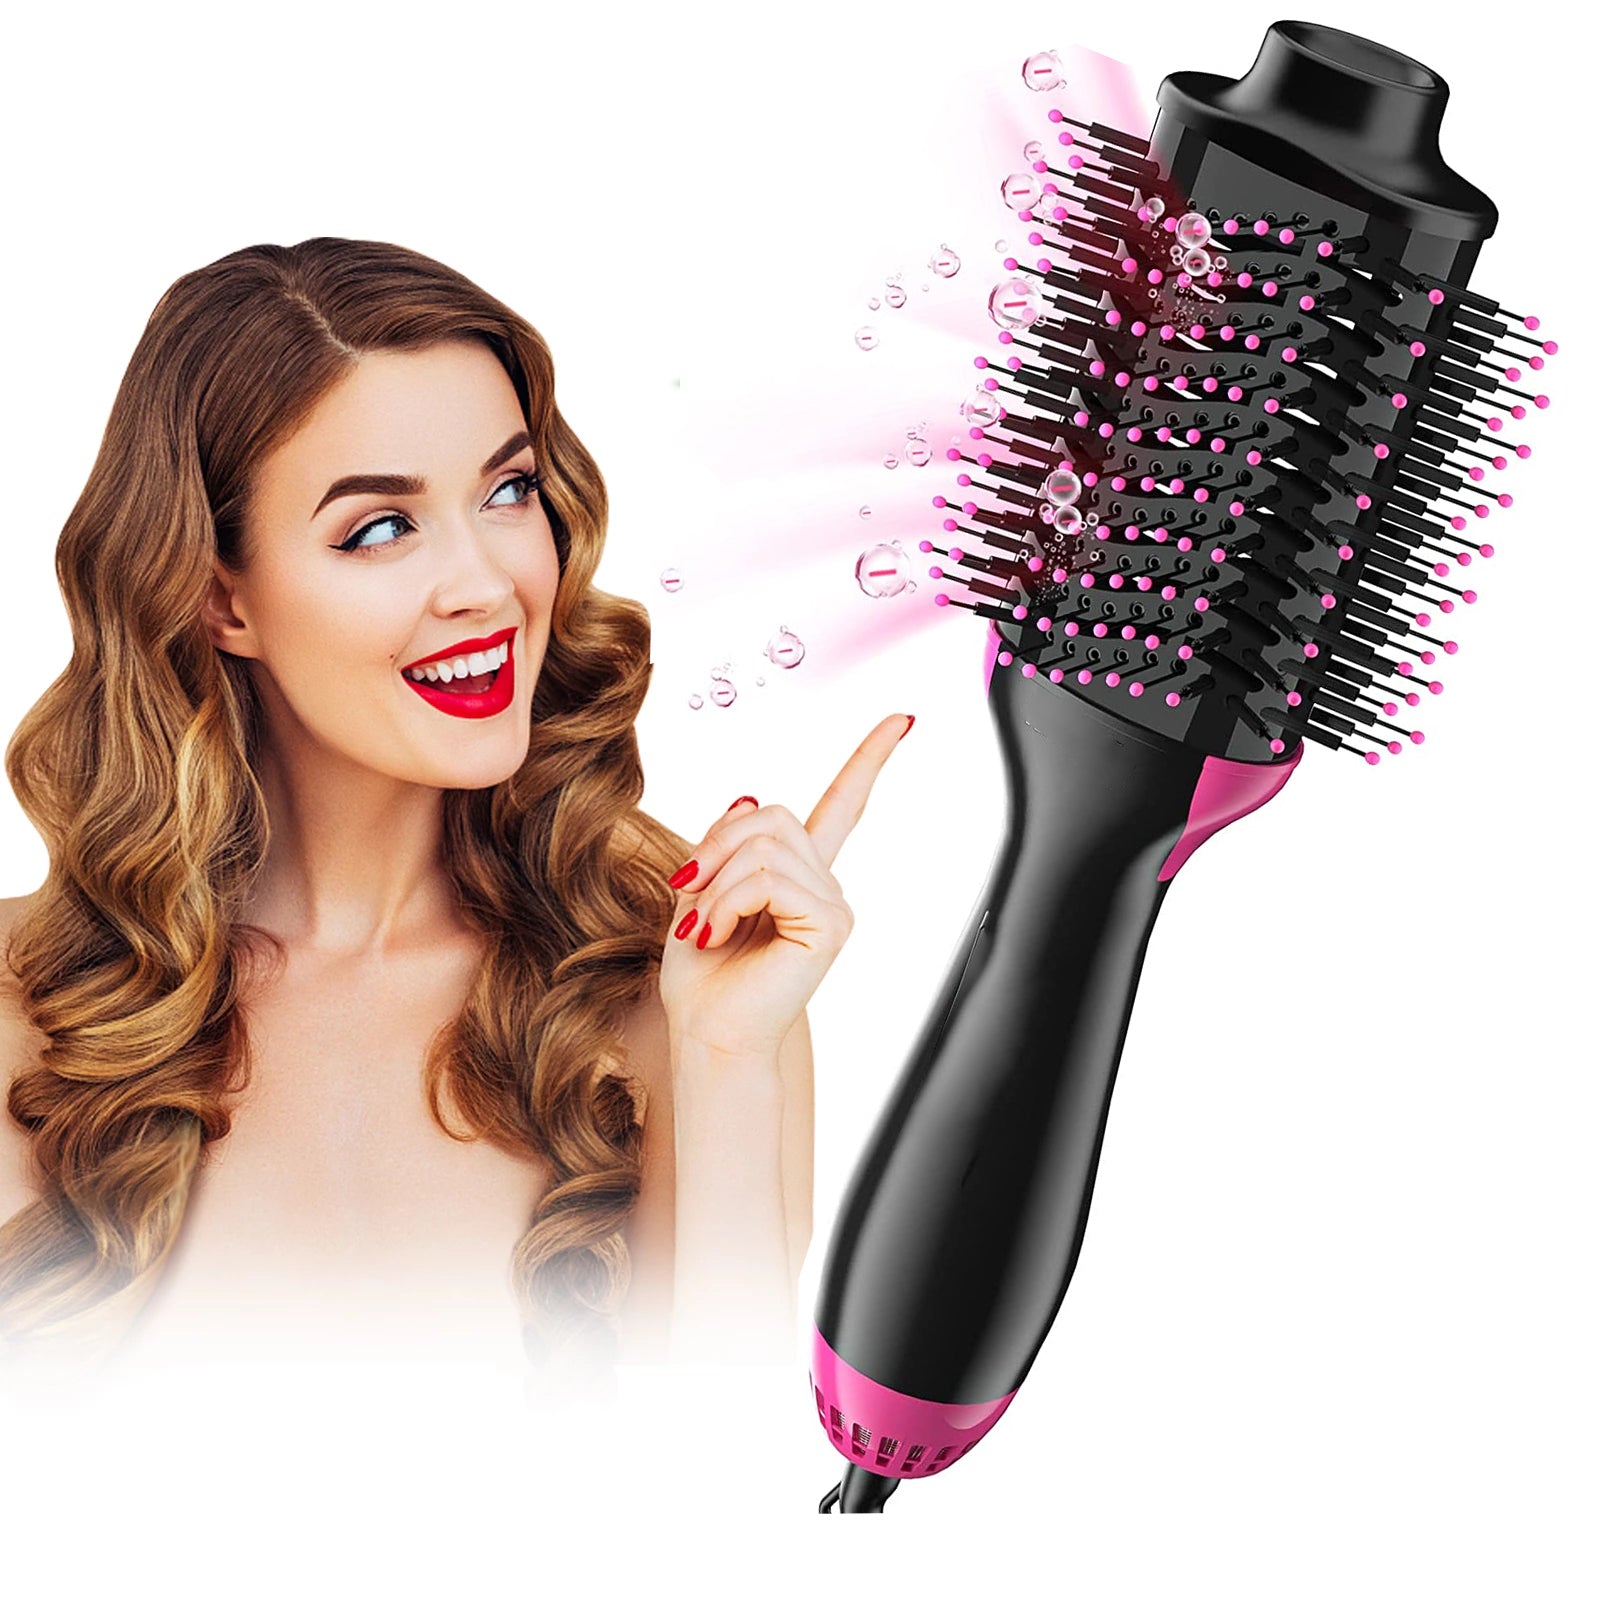 Xpreen Hair Dryer Brush, One Step Hair Dryer, 5 in 1 Hot Air Brush for All Hair Anti-Scald, Fast Drying Straightening Curling Round Blow Hair Dryer Brush Volumizer Styler for Home Salone Salon